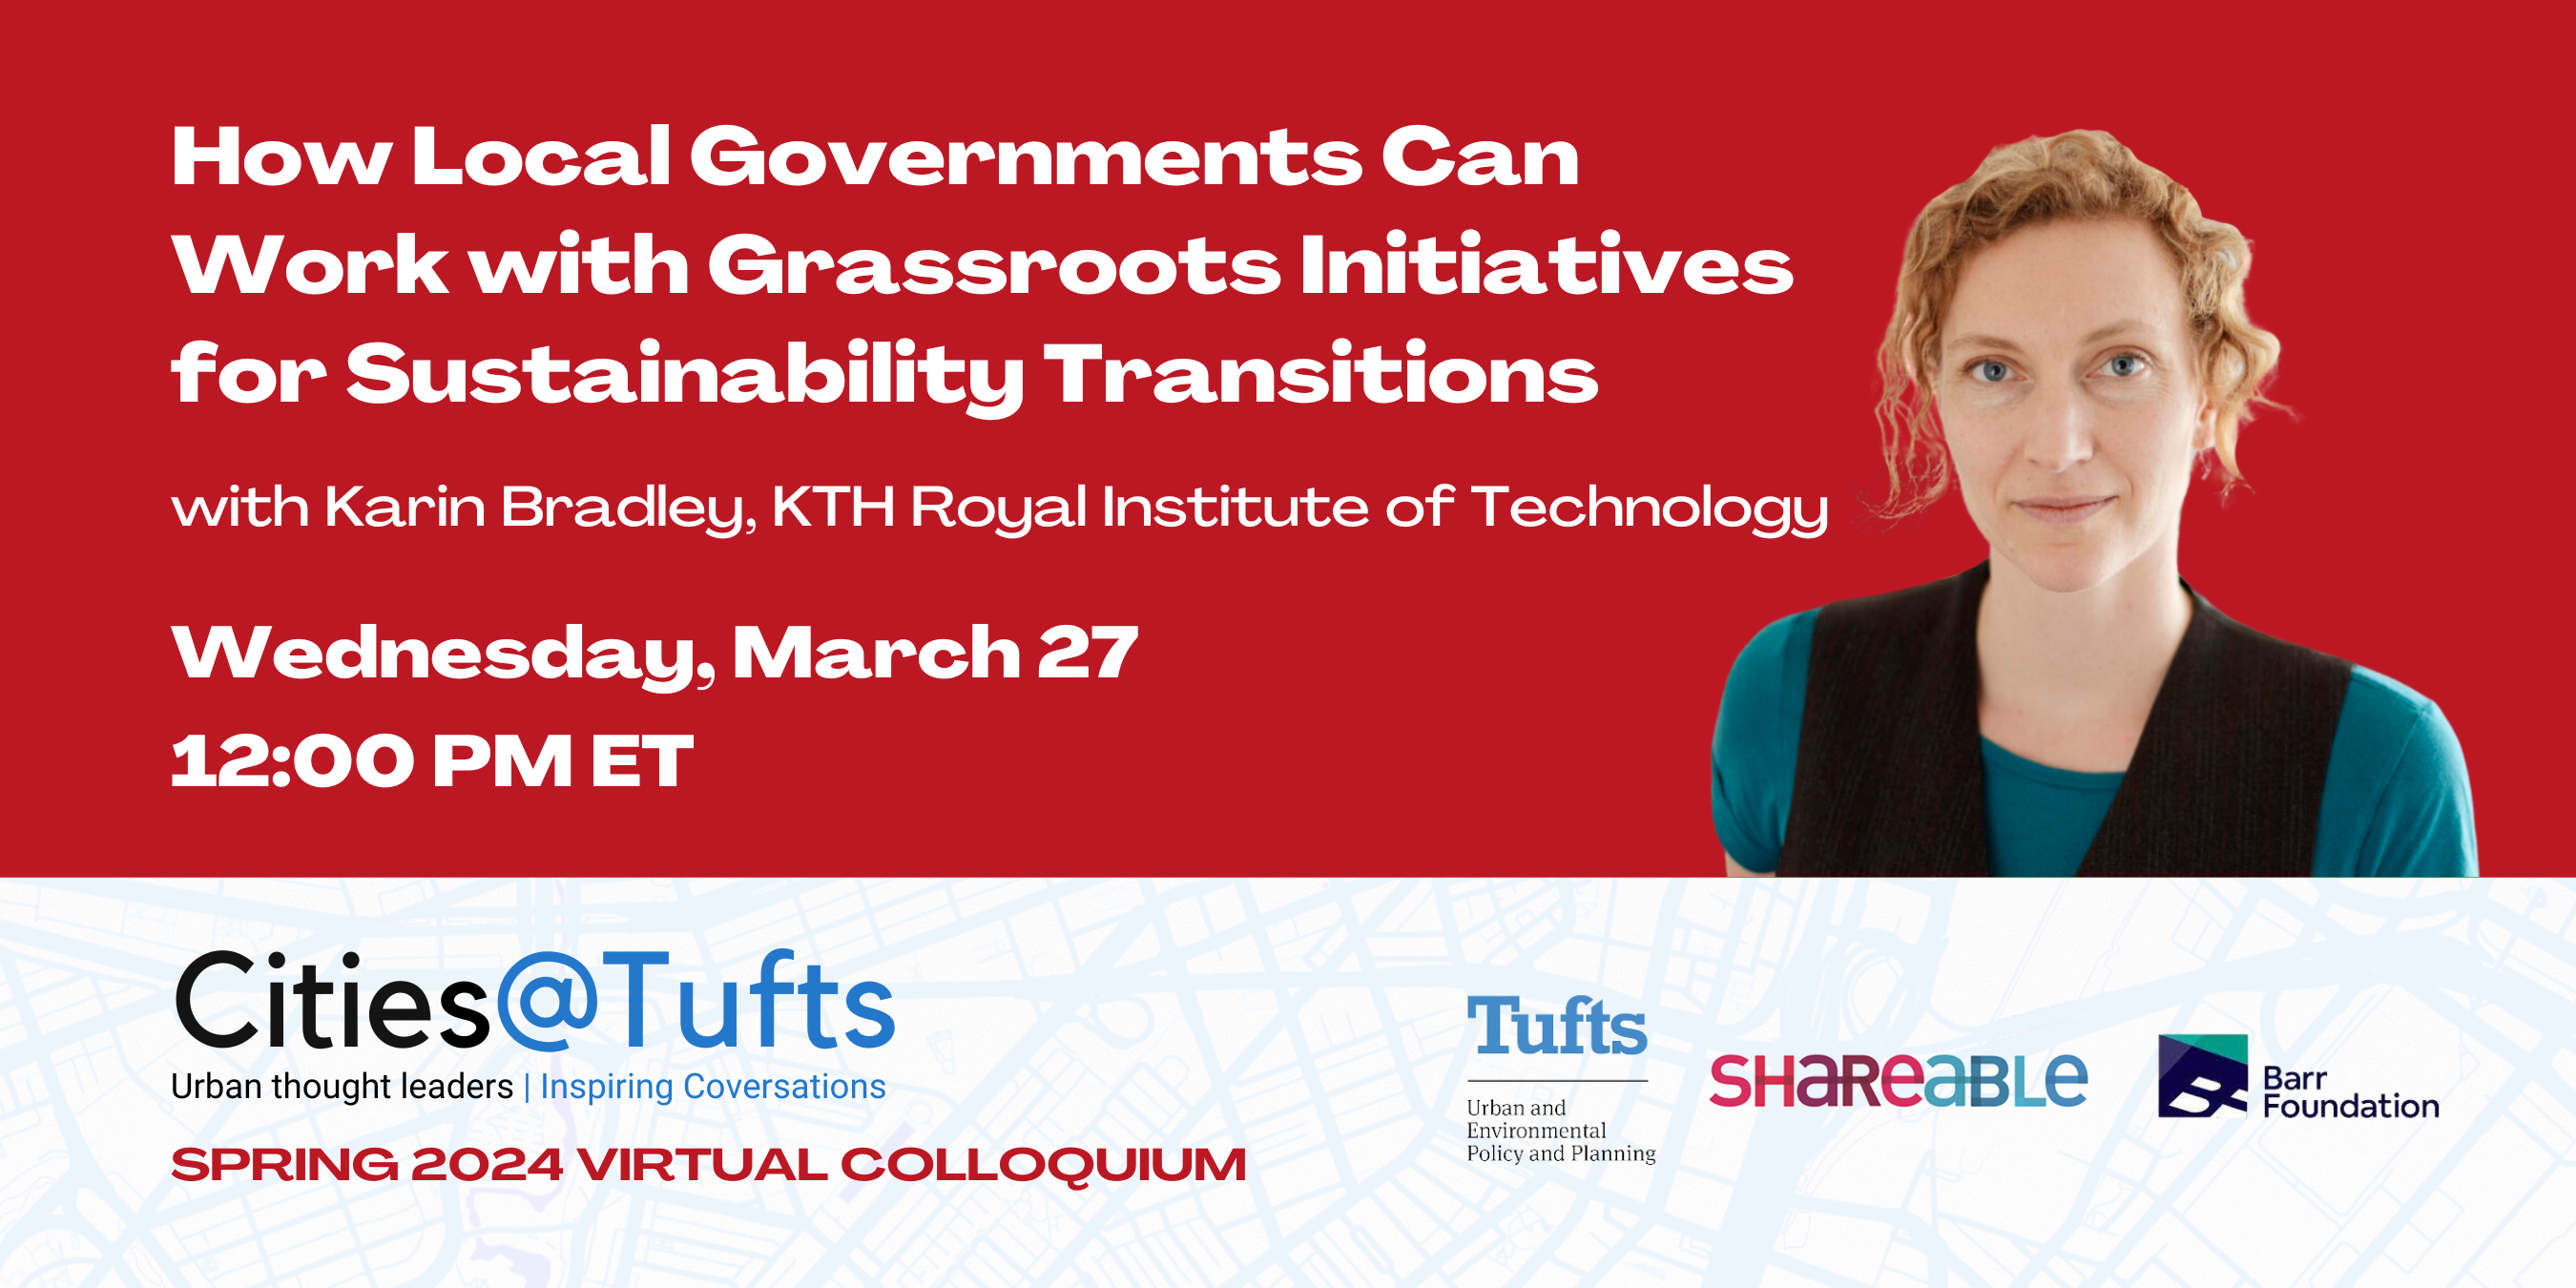 Cities@Tufts promo for an event on Wednesday, March 27 at 12 PM ET.